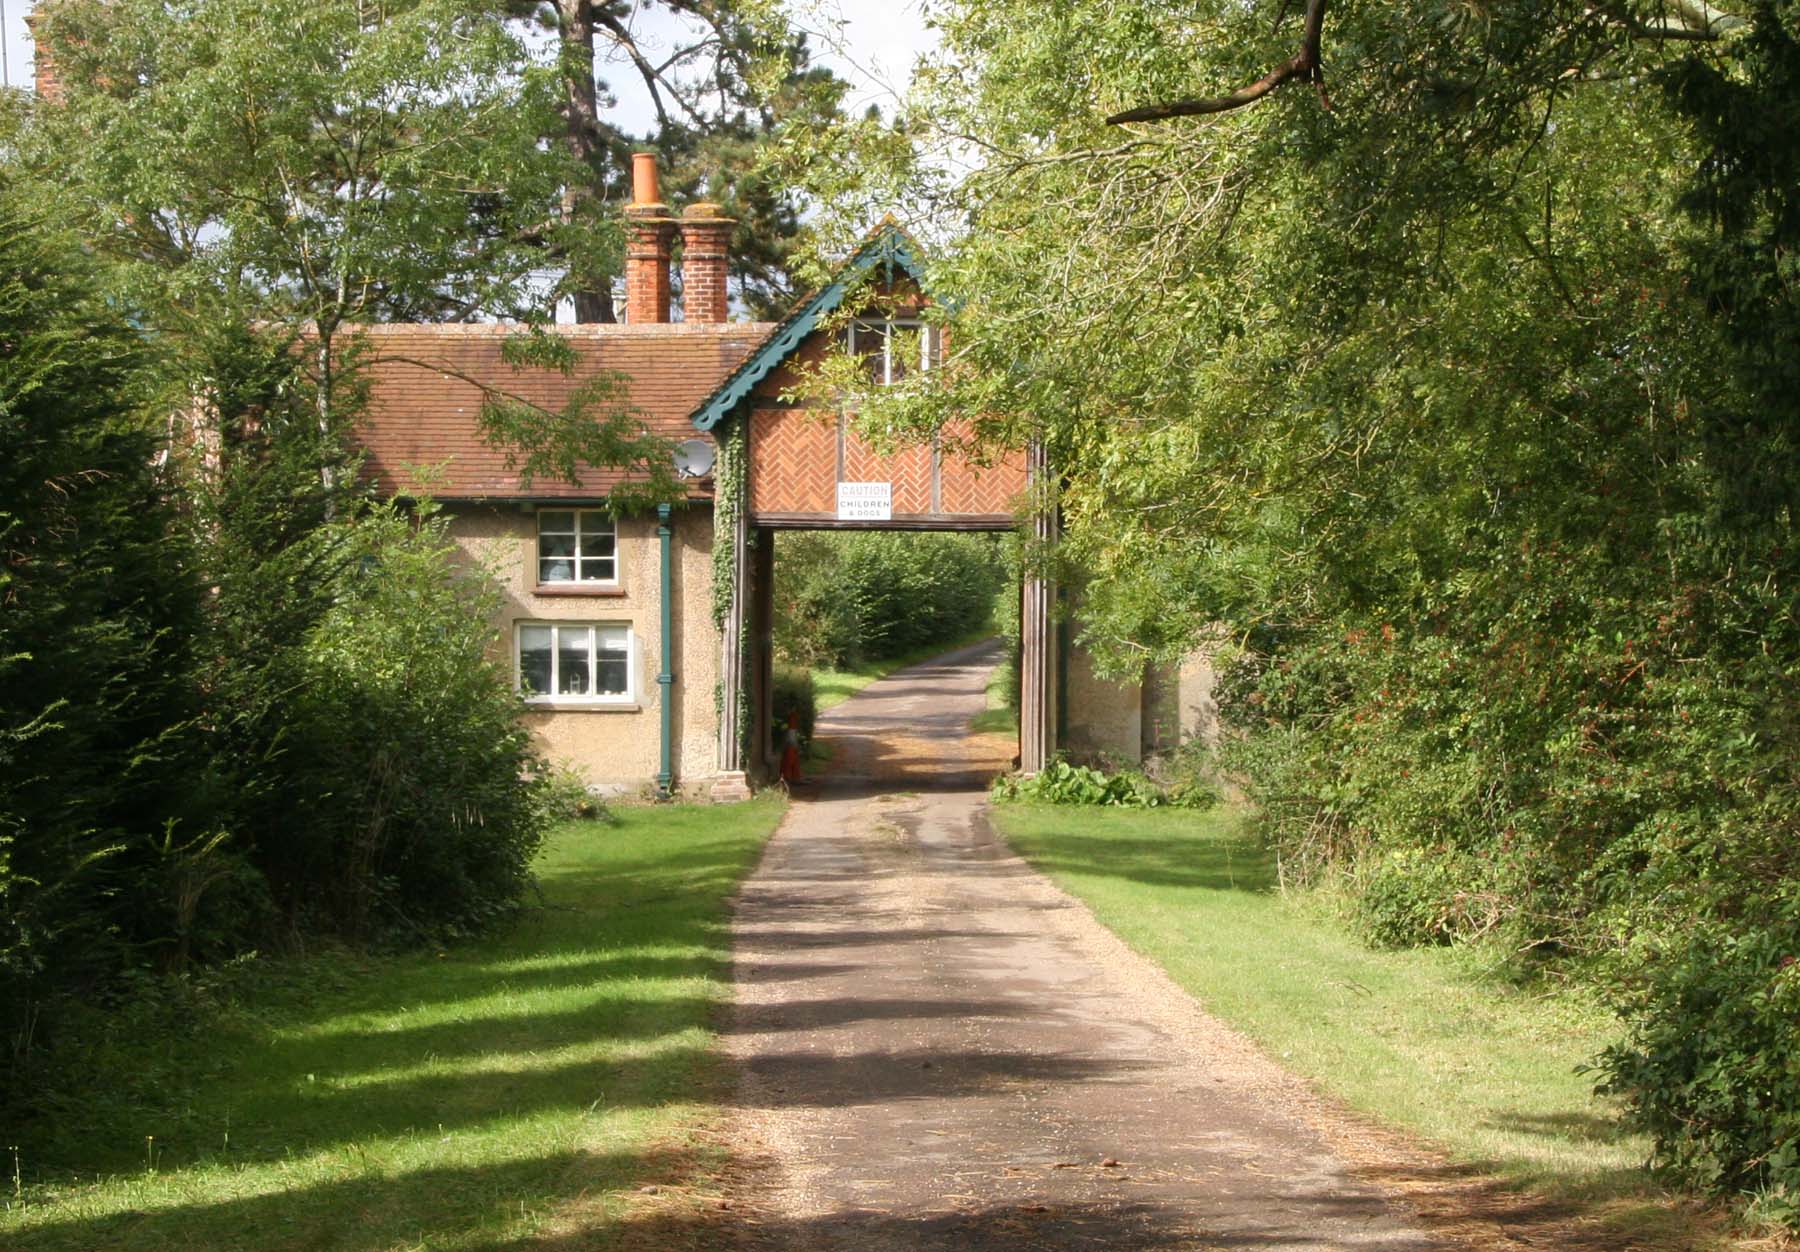 The Lodge and driveway at Doddershall